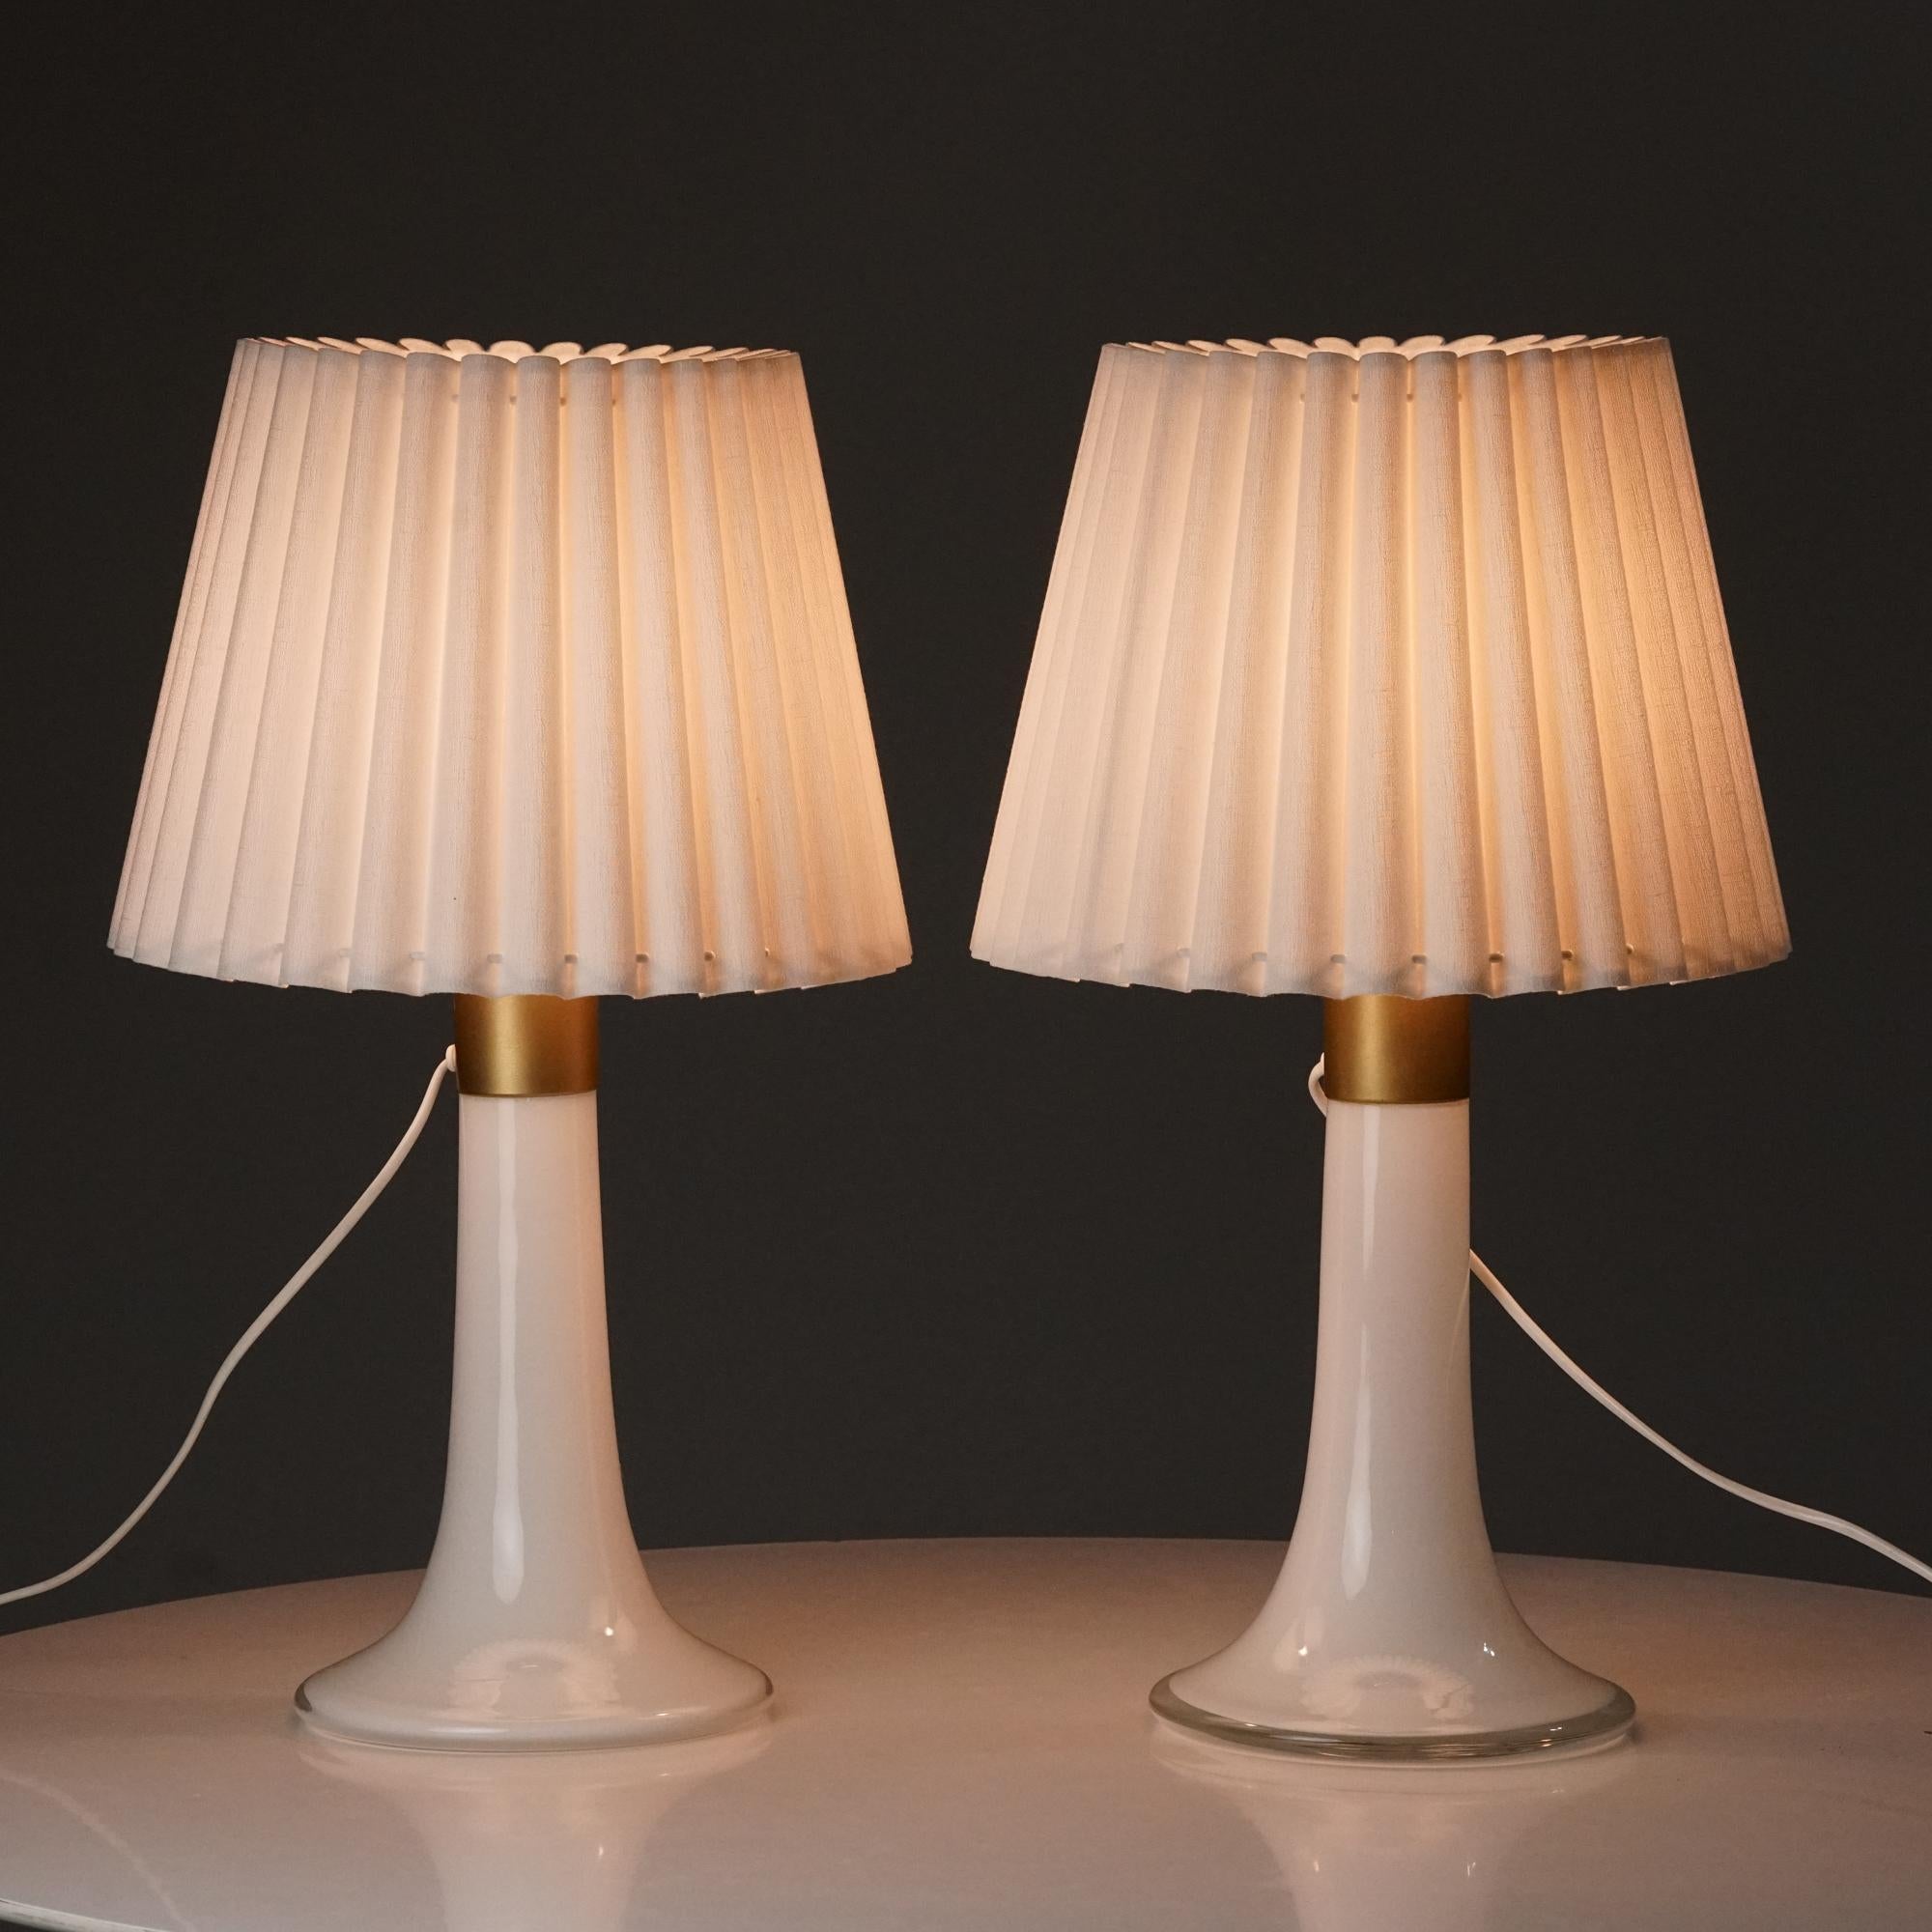 Set of two table lamps designed by Lisa Johansson-Pape manufactured by Orno Oy, 1960s. Glass and painted metal with cotton lampshades. Good vintage condition, minor patina consistent with age and use. The lamps are sold as a set. 